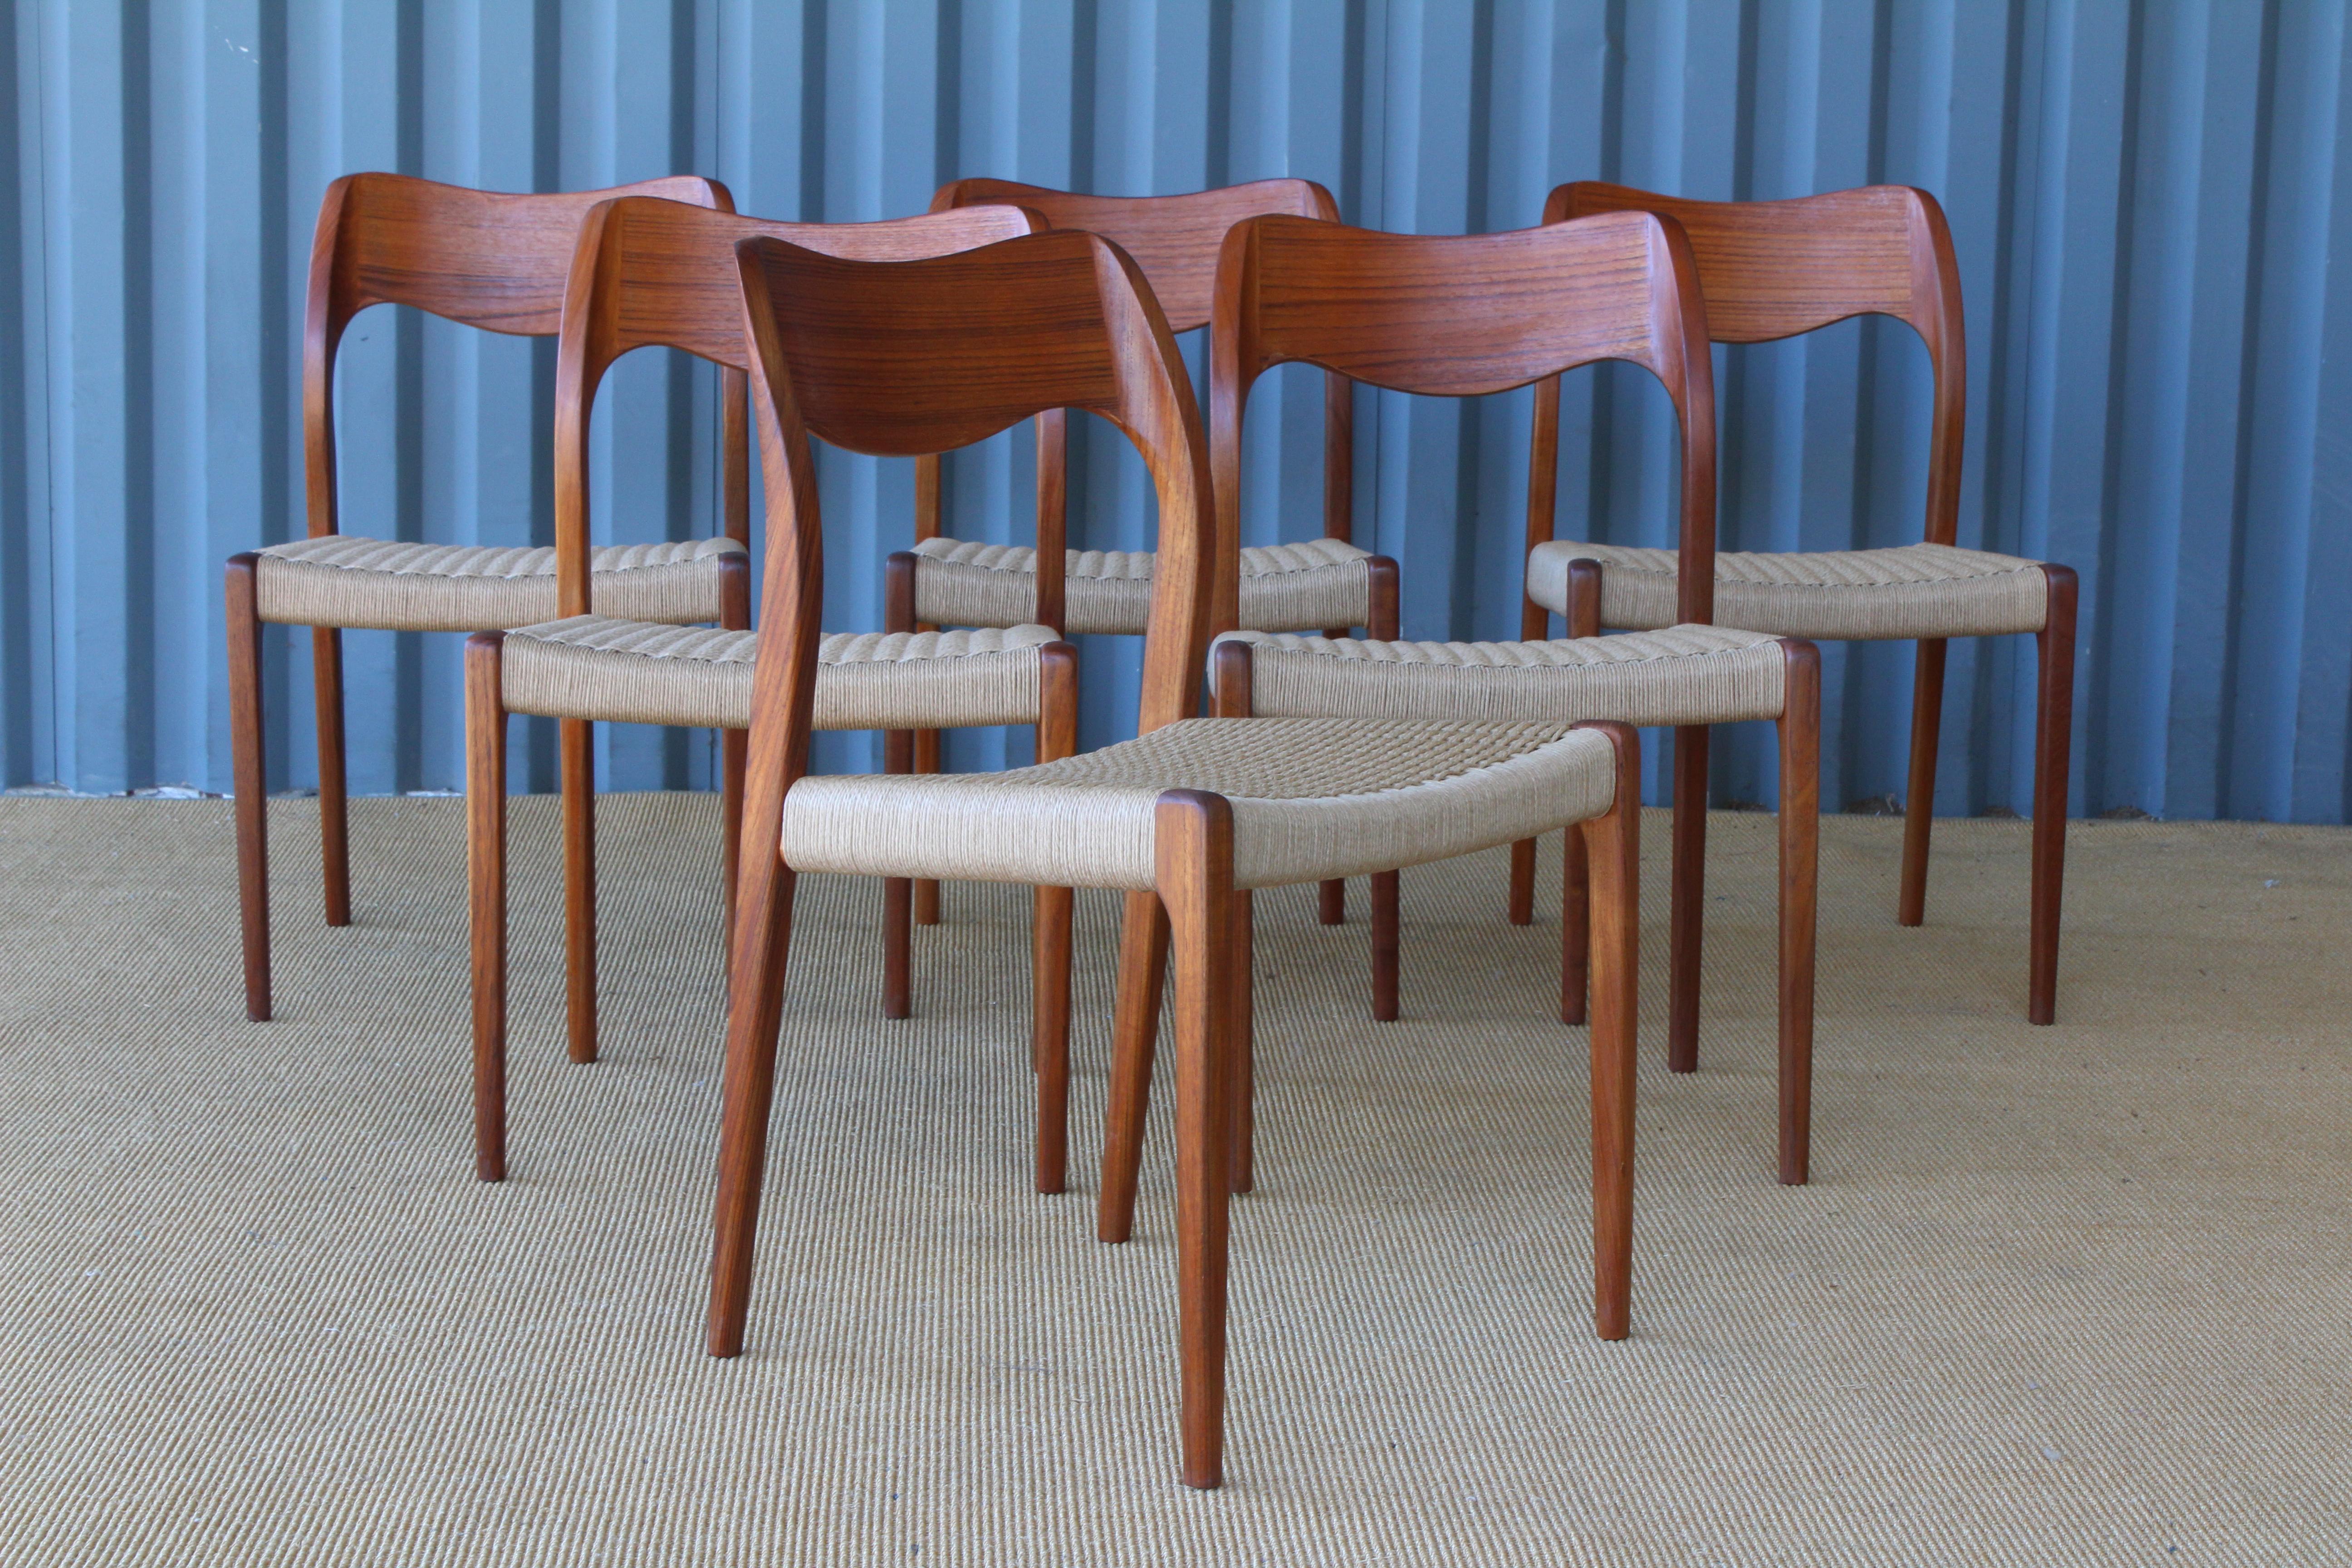 Set of six teak dining chairs by Niels Moller. The entire set of six has been completely refinished including new woven papercord seats. Price is for the set of six.